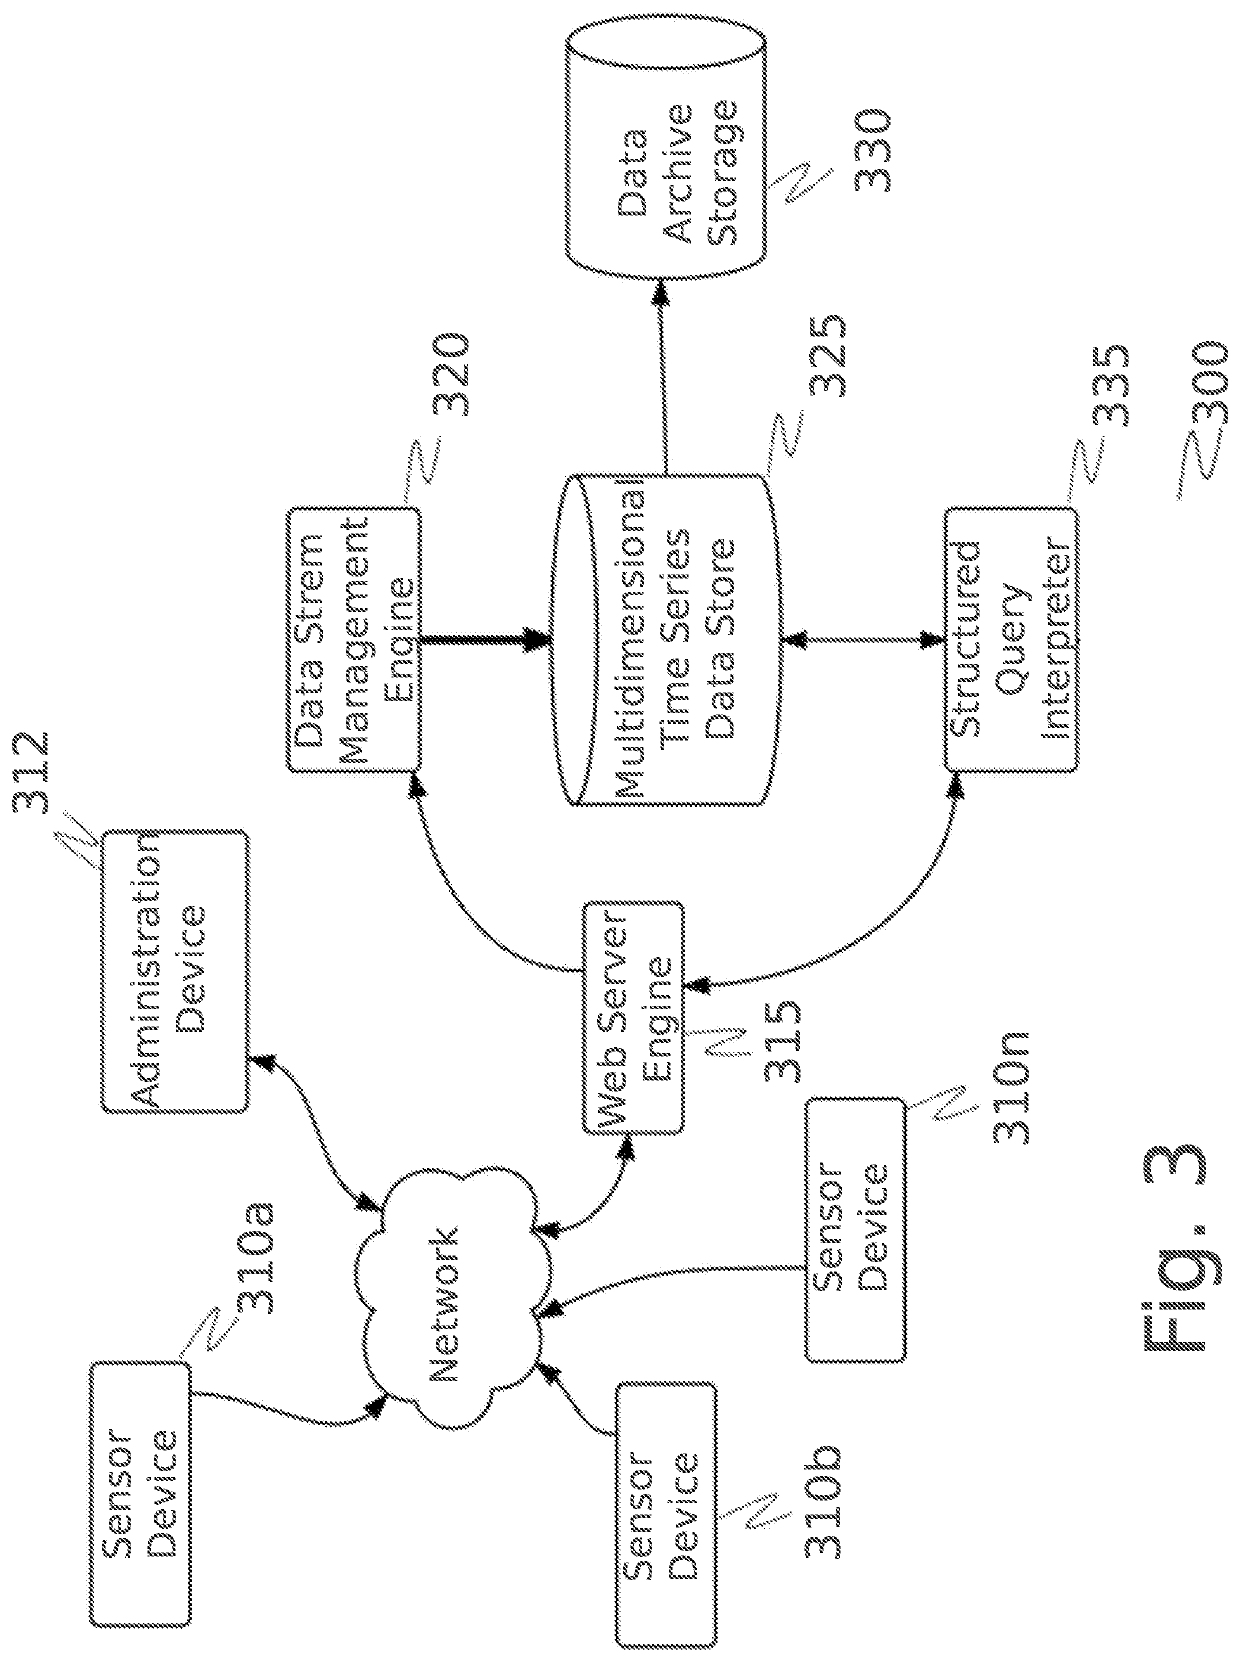 System and methods for creation and use of meta-models in simulated environments